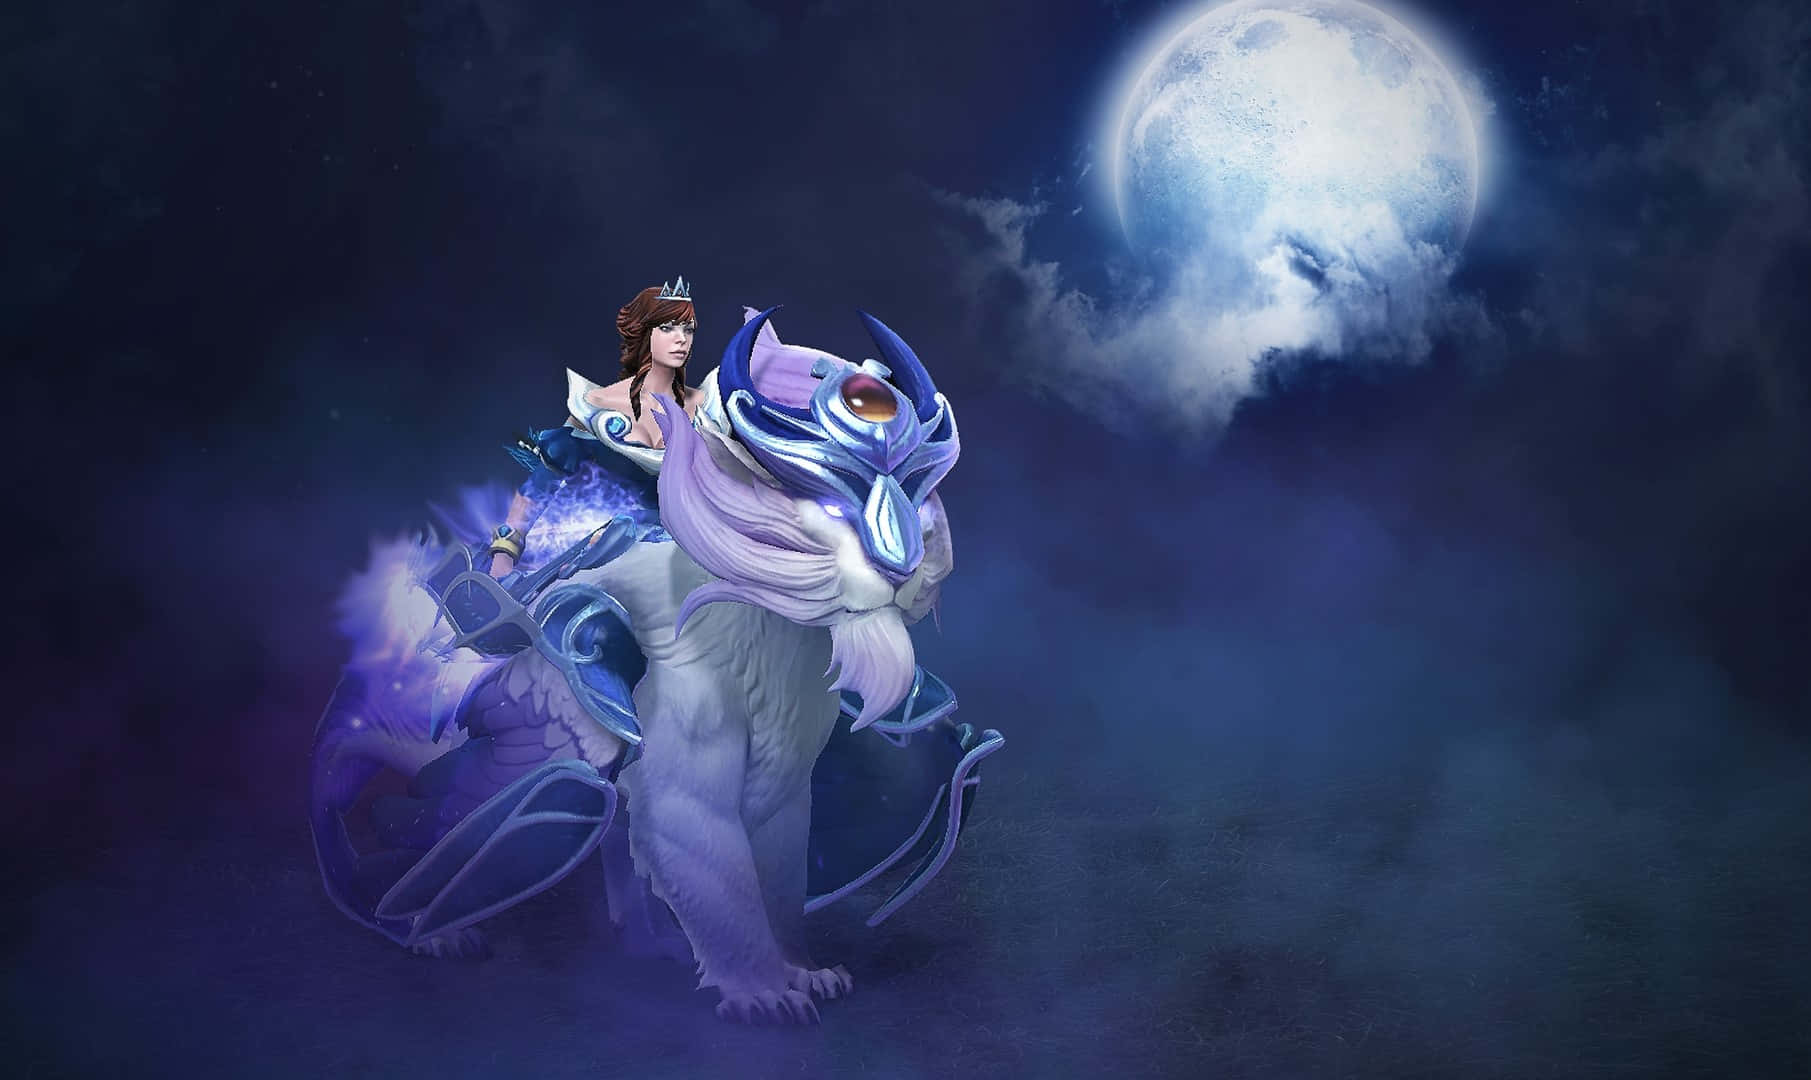 Mirana, the Princess of the Moon, in all her majestic glory on her mount. Wallpaper